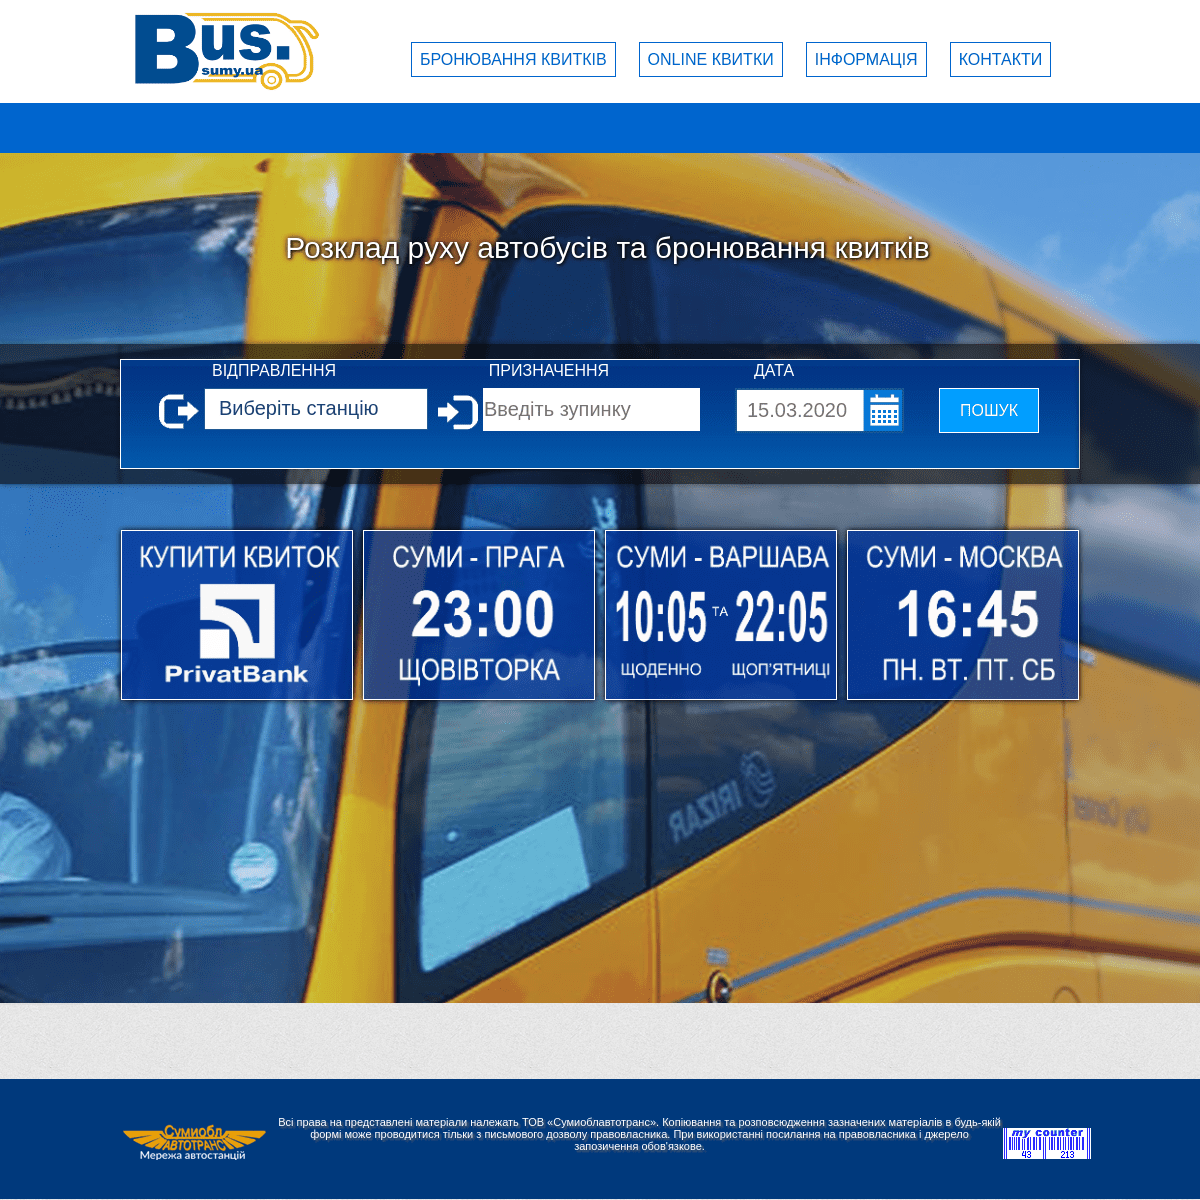 A complete backup of bus.sumy.ua